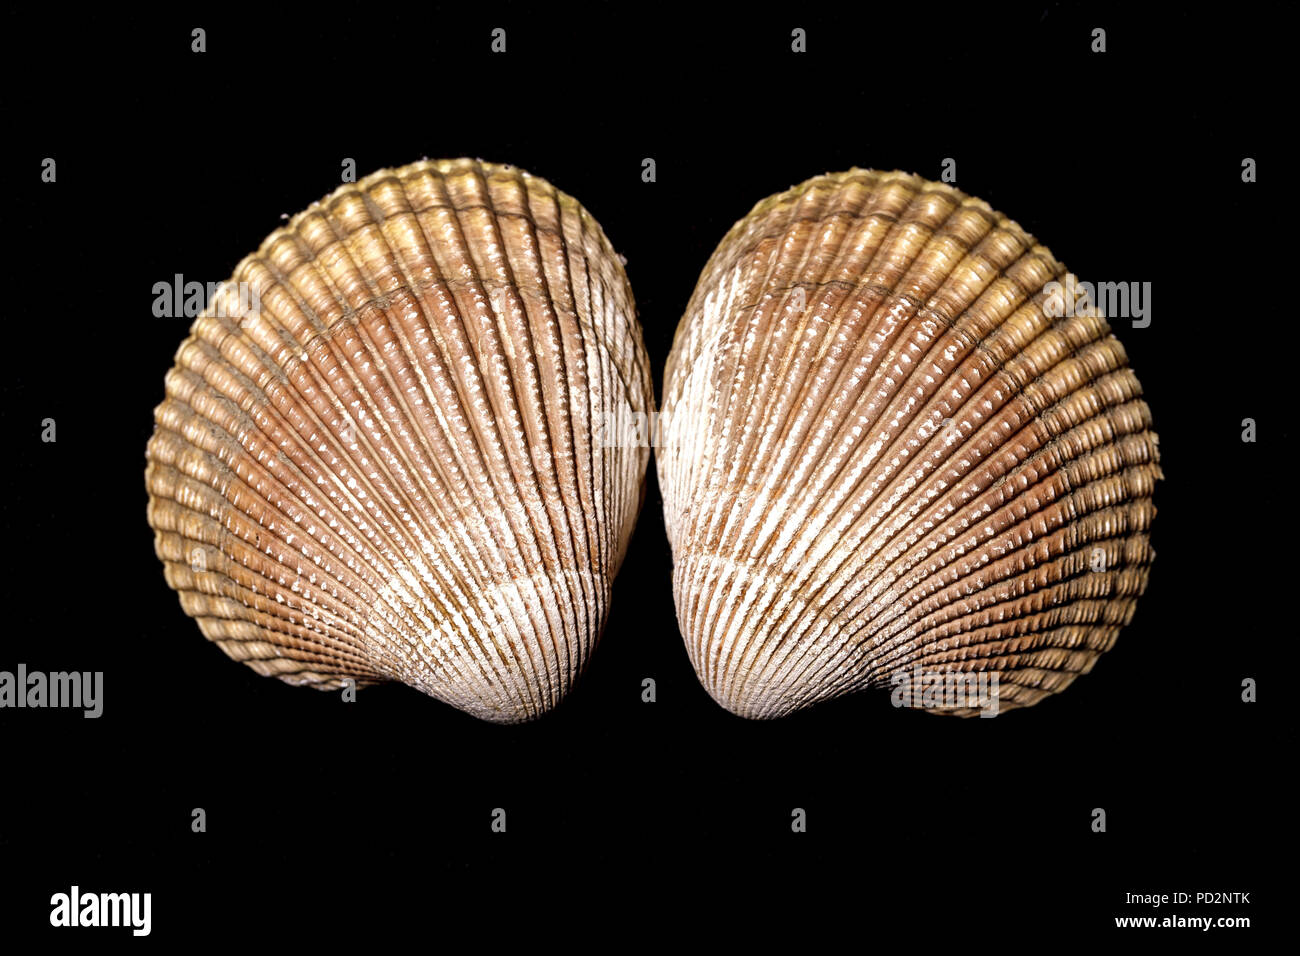 Macro photo of cockle clam shells in a studio setting. Stock Photo